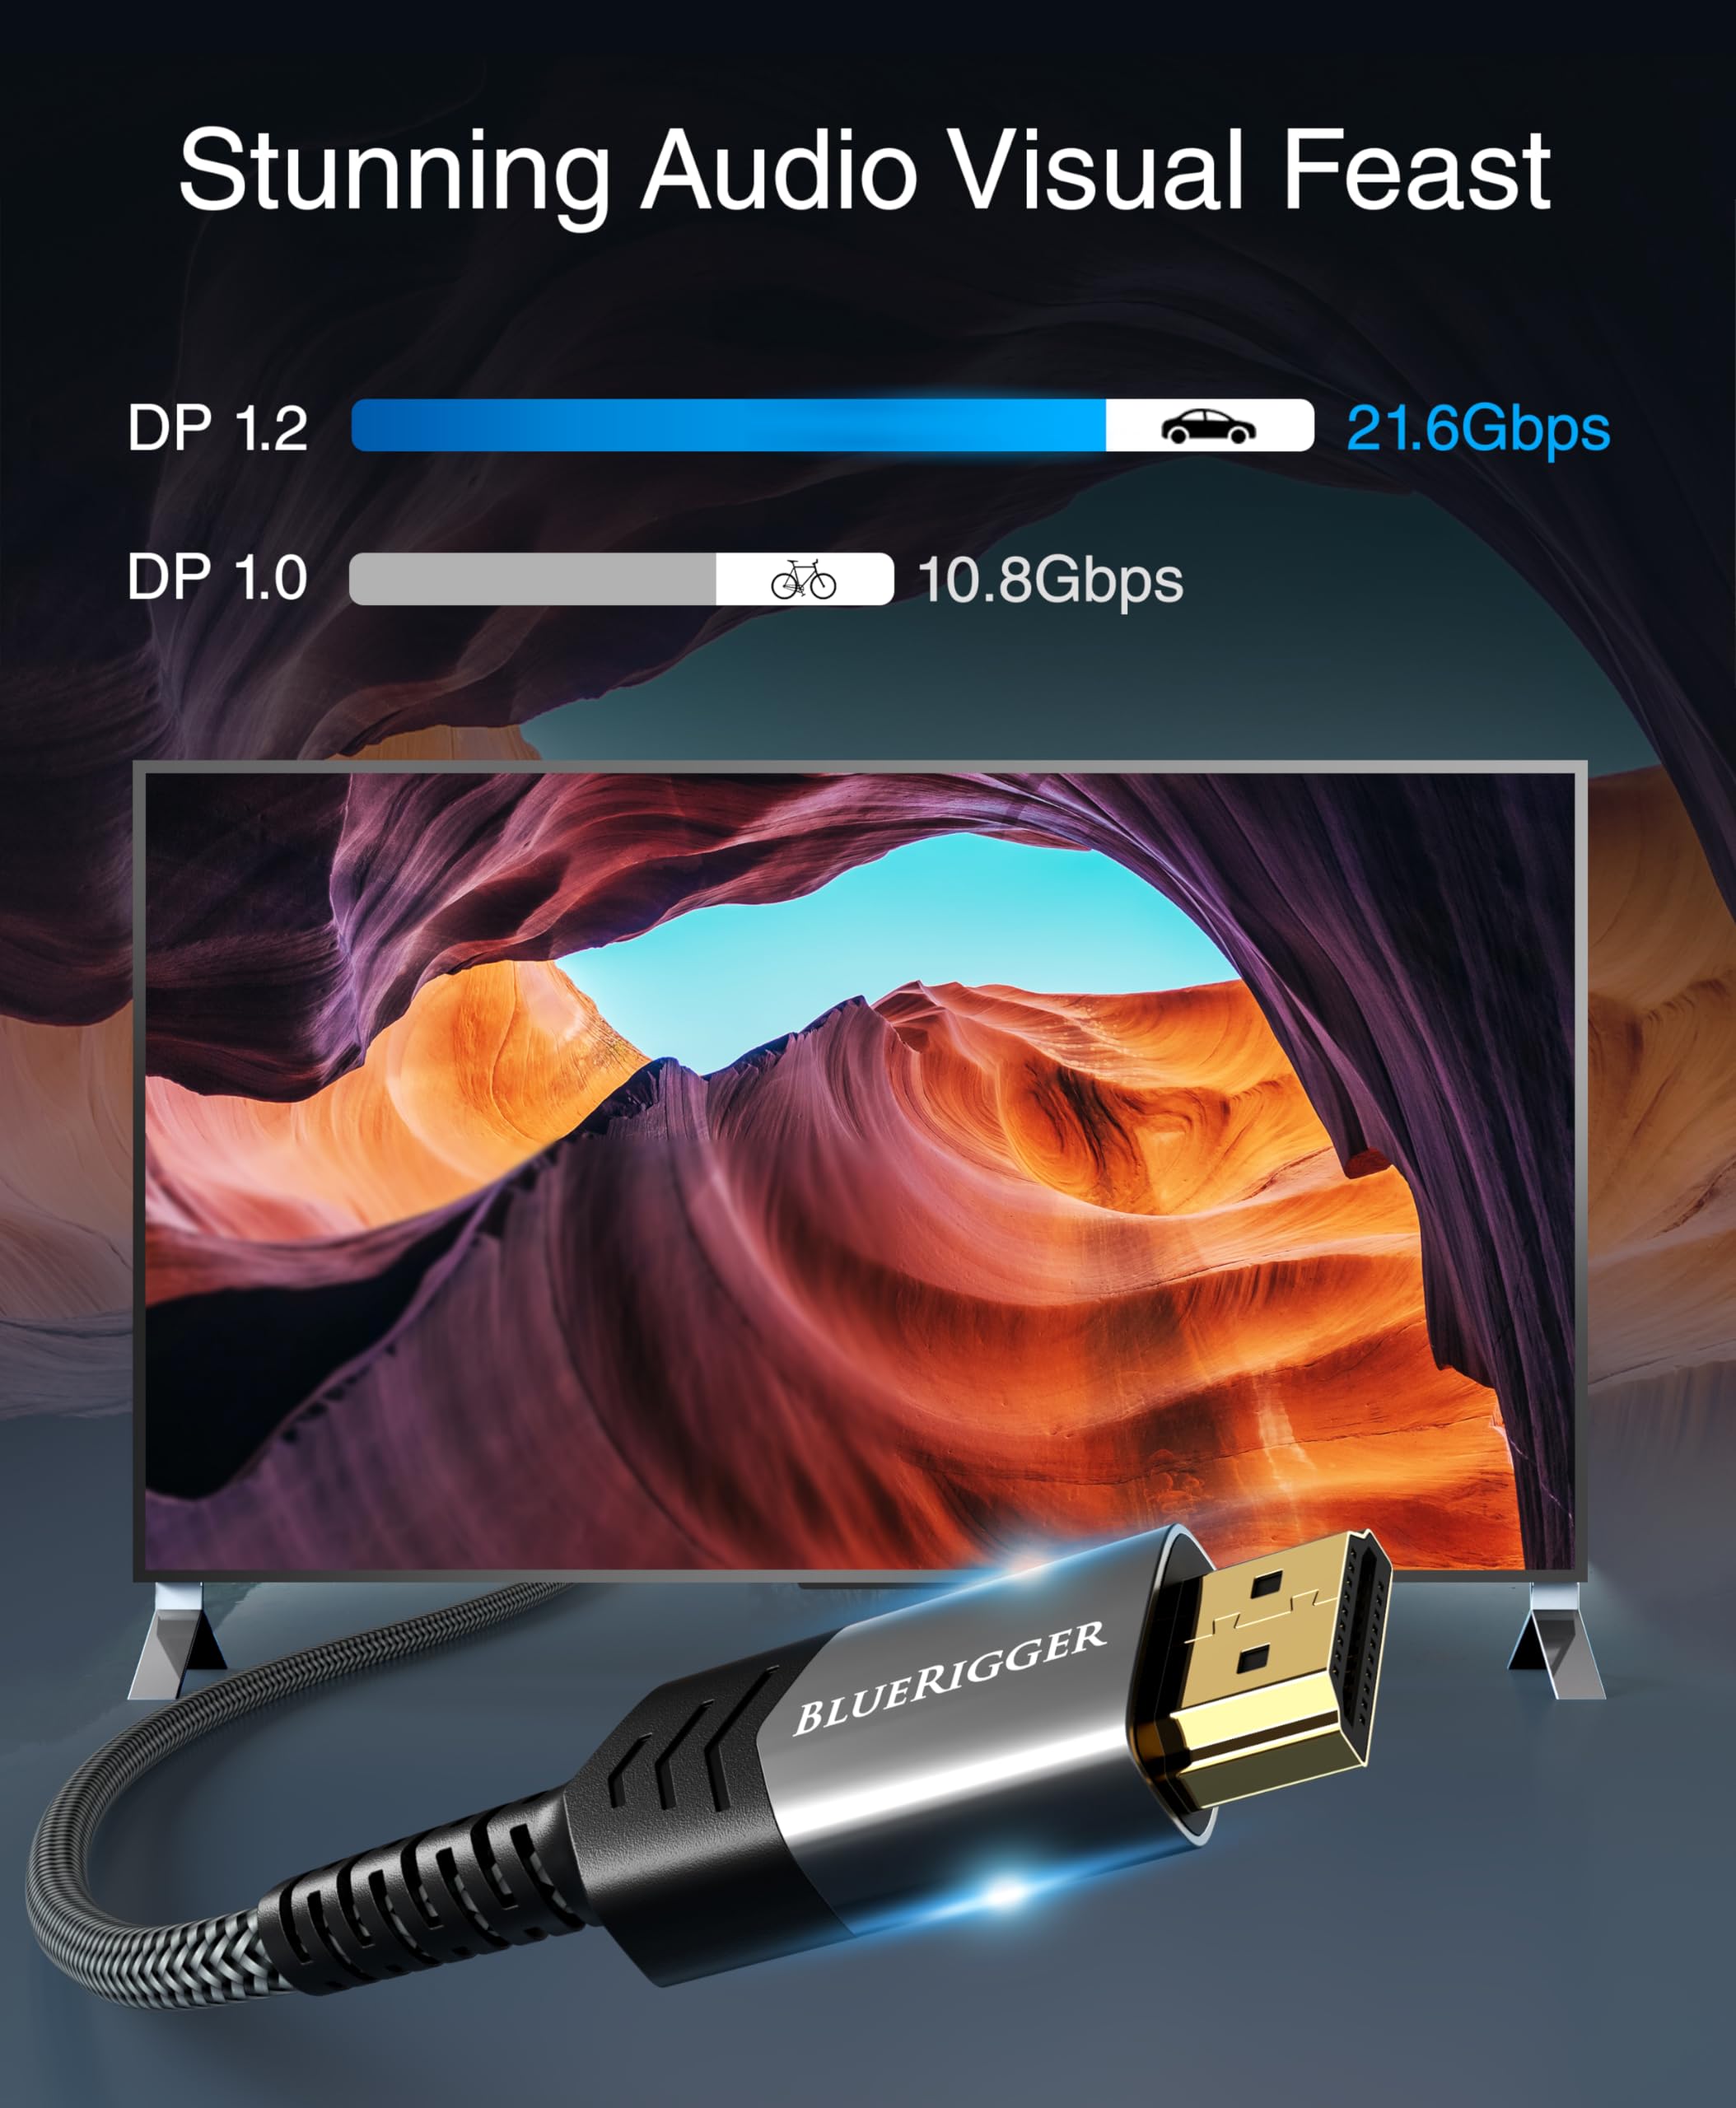 BlueRigger DisplayPort to HDMI 4K 60Hz Cable 15FT - (Uni-Directional, DP to HDMI Cord, HDR, HDCP 2.2, Display to HDMI Male Video Cable) - Compatible with PC, Laptop, HDTV, Monitor, Projector